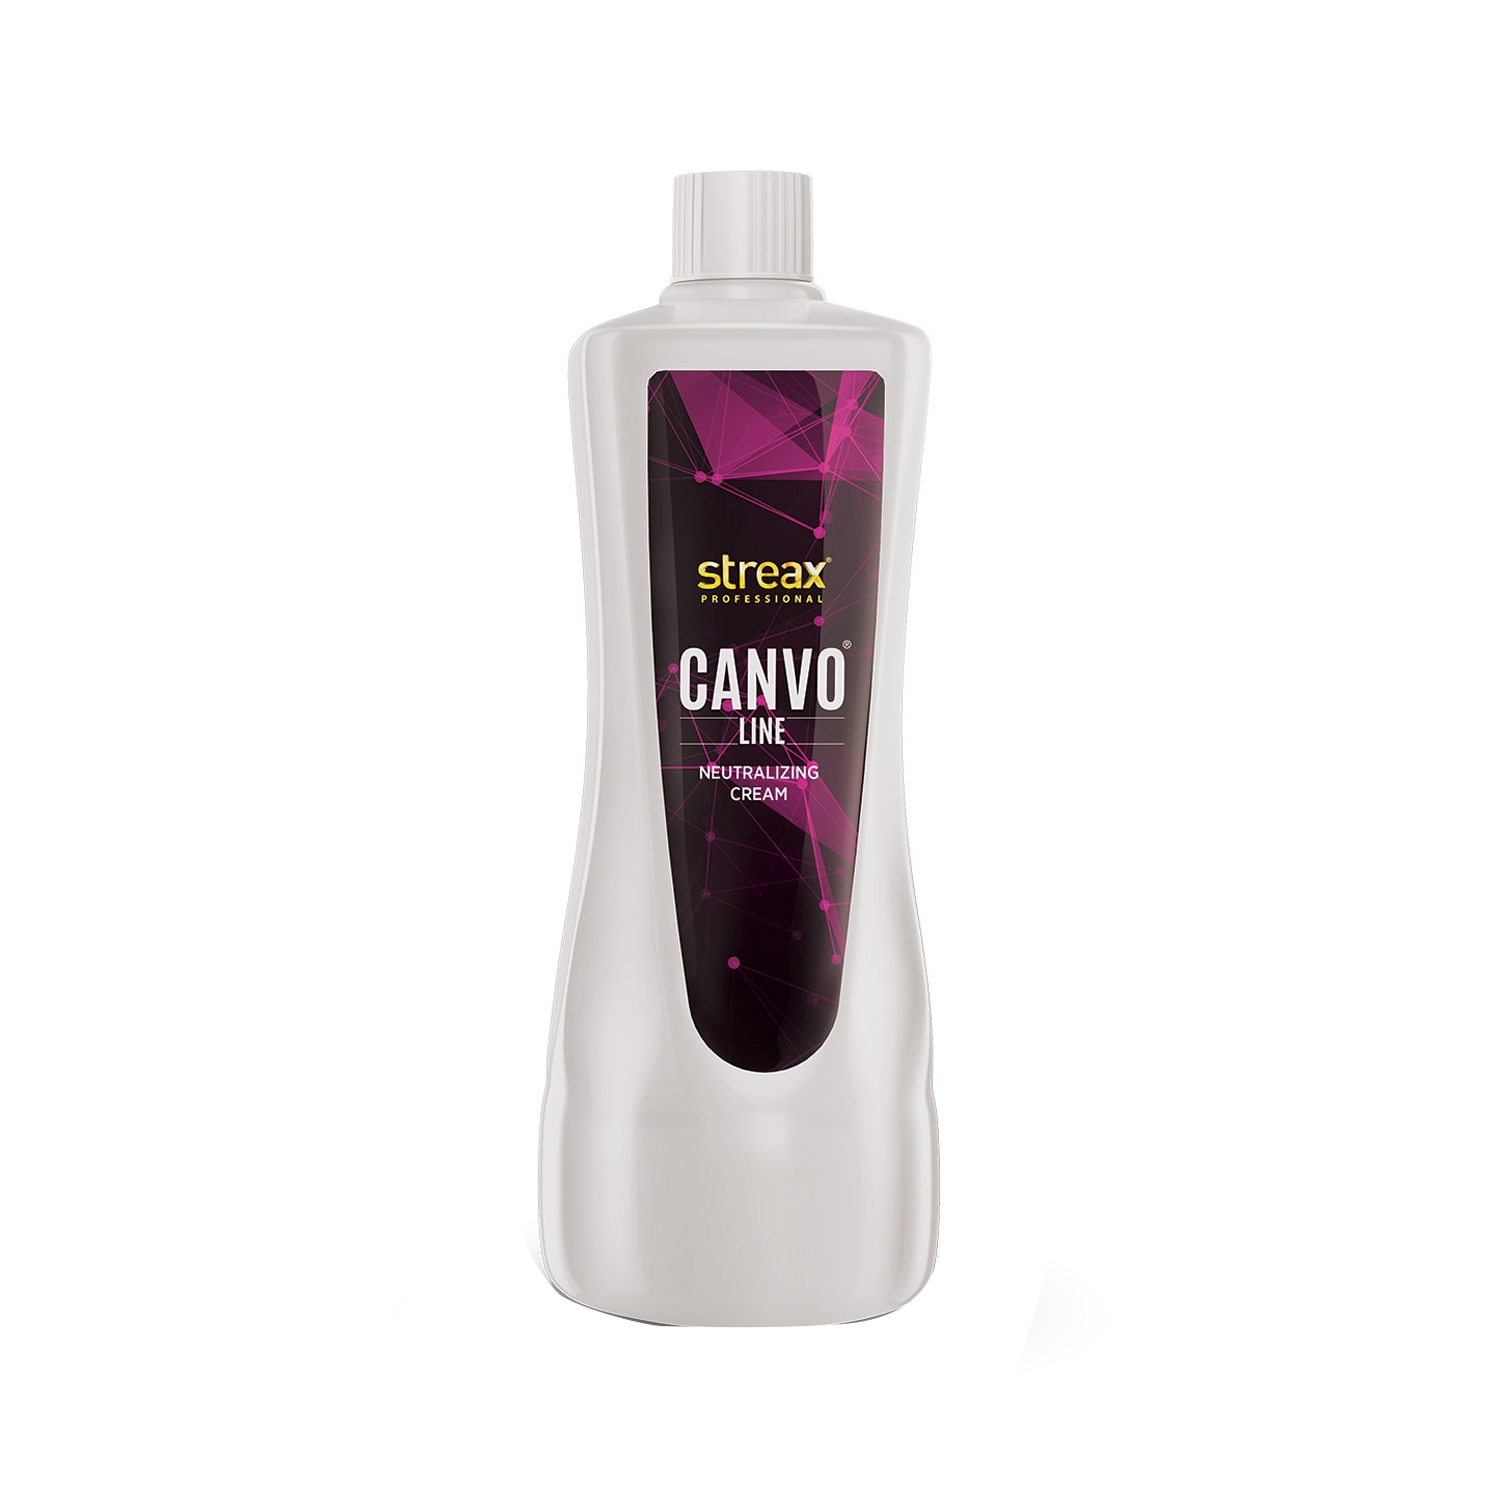 Streax Professional Canvoline Neutralizing Cream Buy Streax Professional  Canvoline Neutralizing Cream Online at Best Price in India  Nykaa